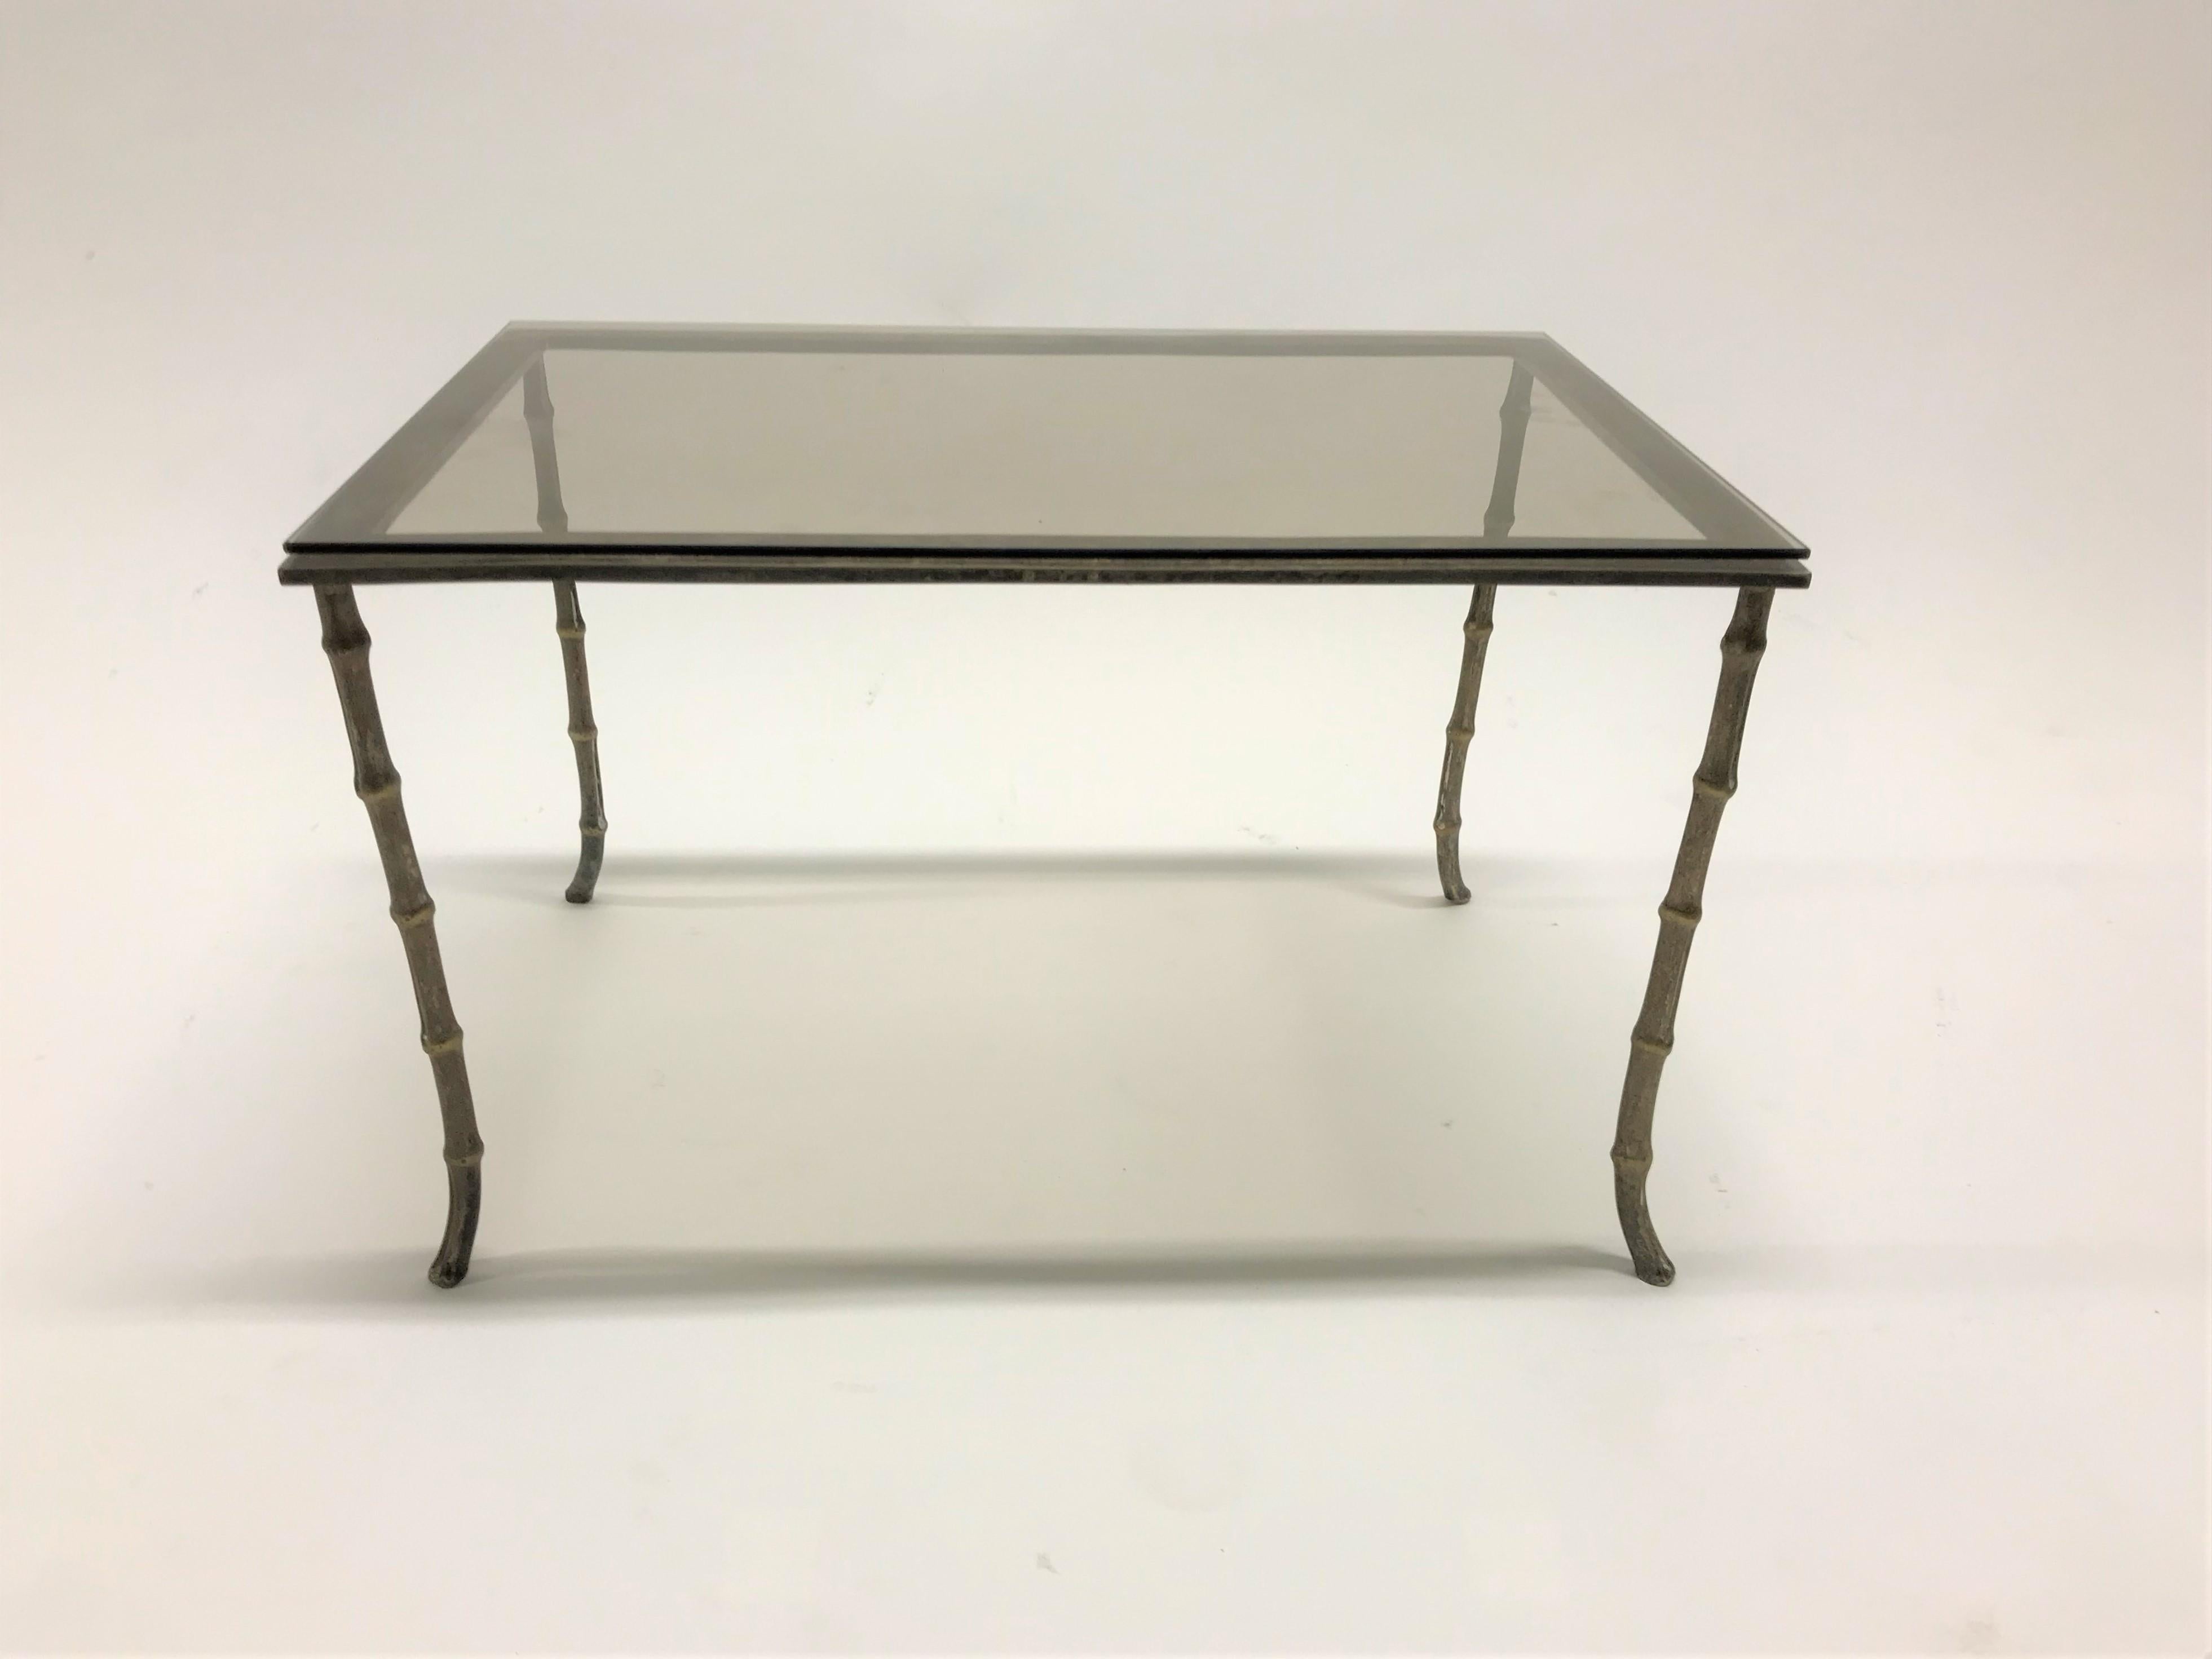 Beautiful bronze faux bamboo coffee table with a smoked glass top by Maison Baguès.

The table is finely crafted and has bent legs.

The table aged beautifully giving it a real charming appeal.

1950s, France

Dimensions:
Height 30